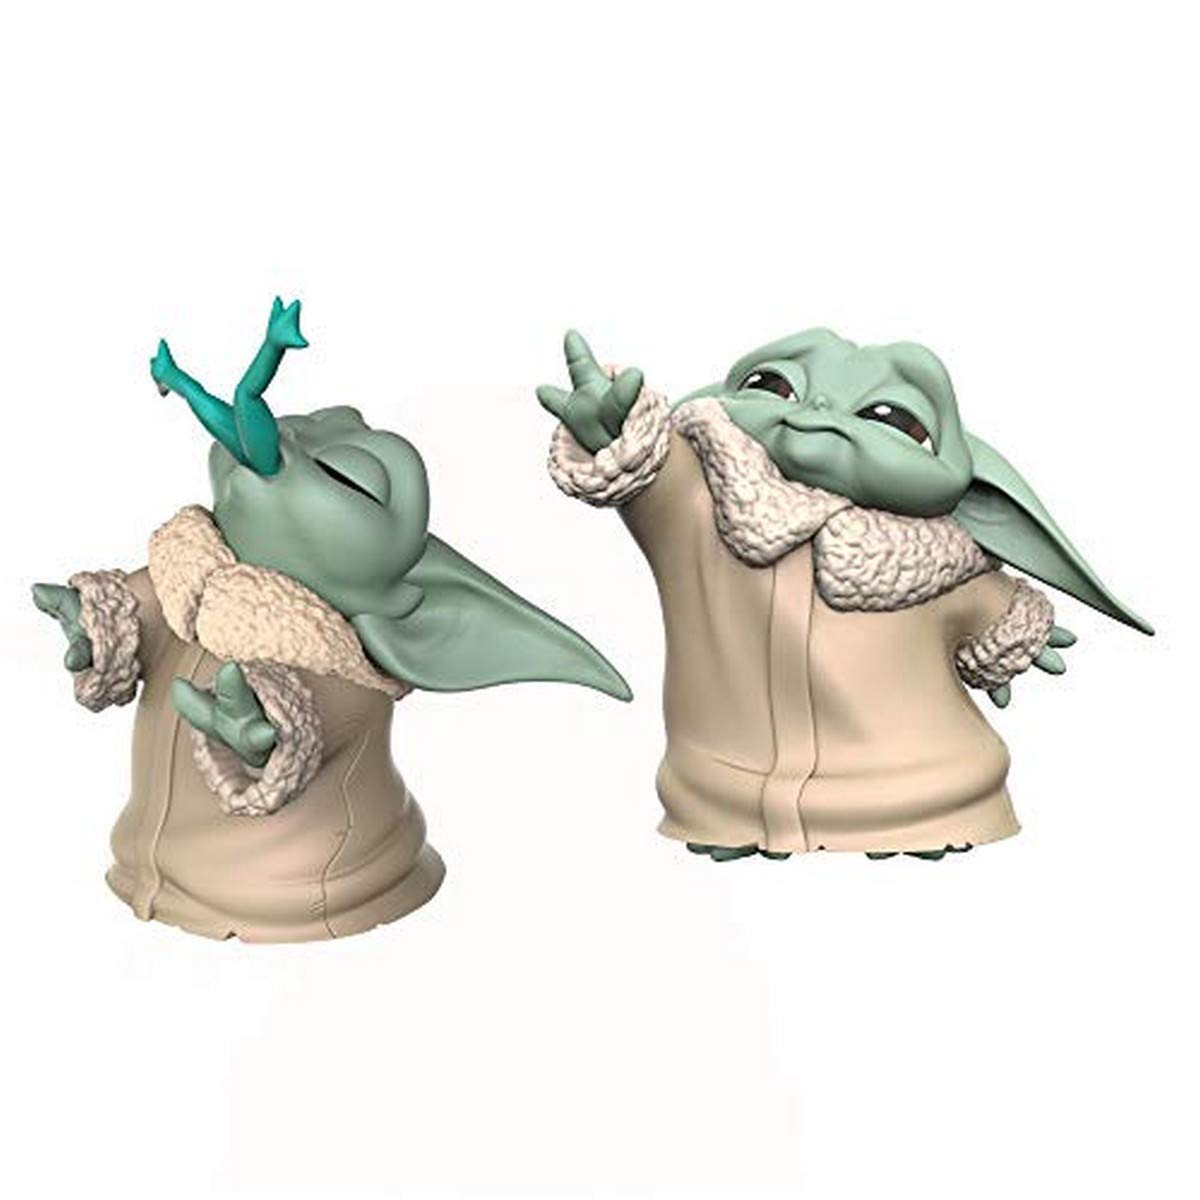 Star Wars Hasbro Mandalorian Grogu The Child Collectible Toys 2.2-Inch “Baby Yoda” Froggy Snack Figure 2-Pack $5.99 Prime Exclusive Price